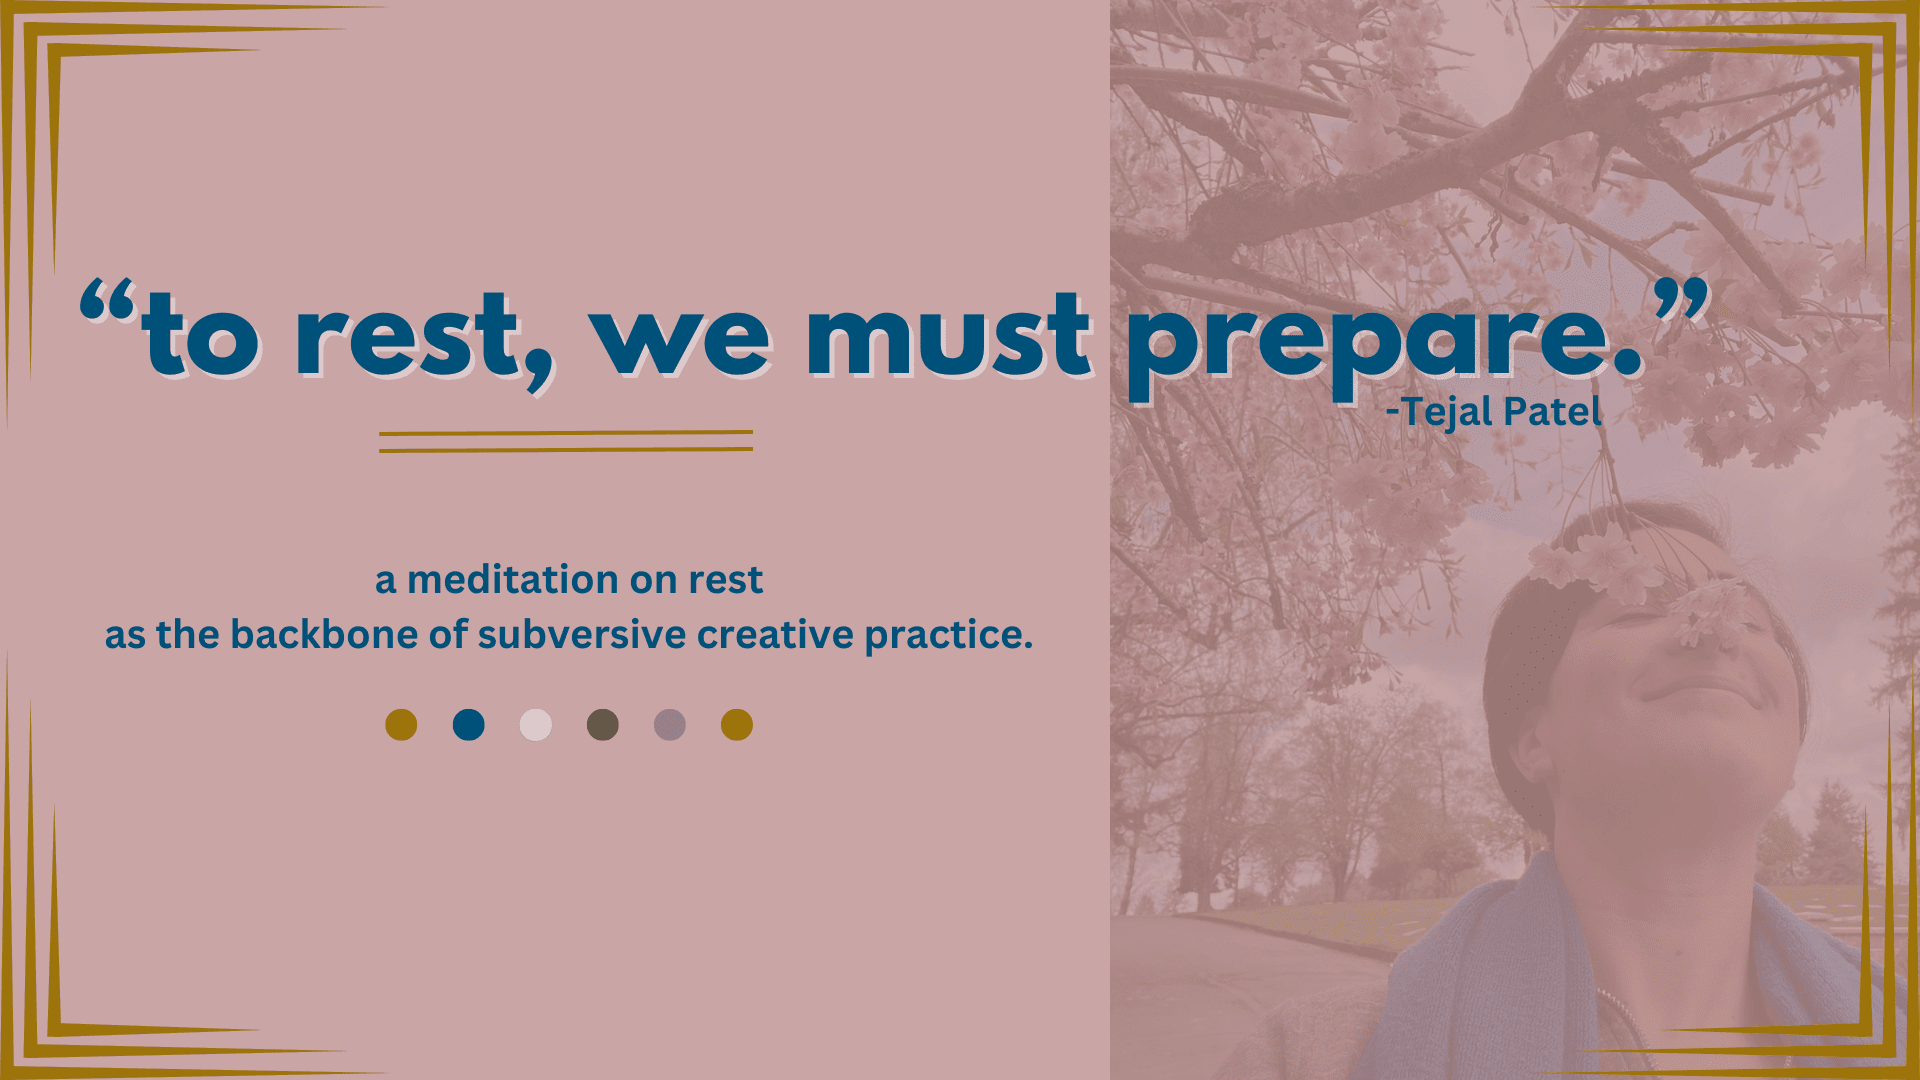 “To rest we must prepare.” (huh?)